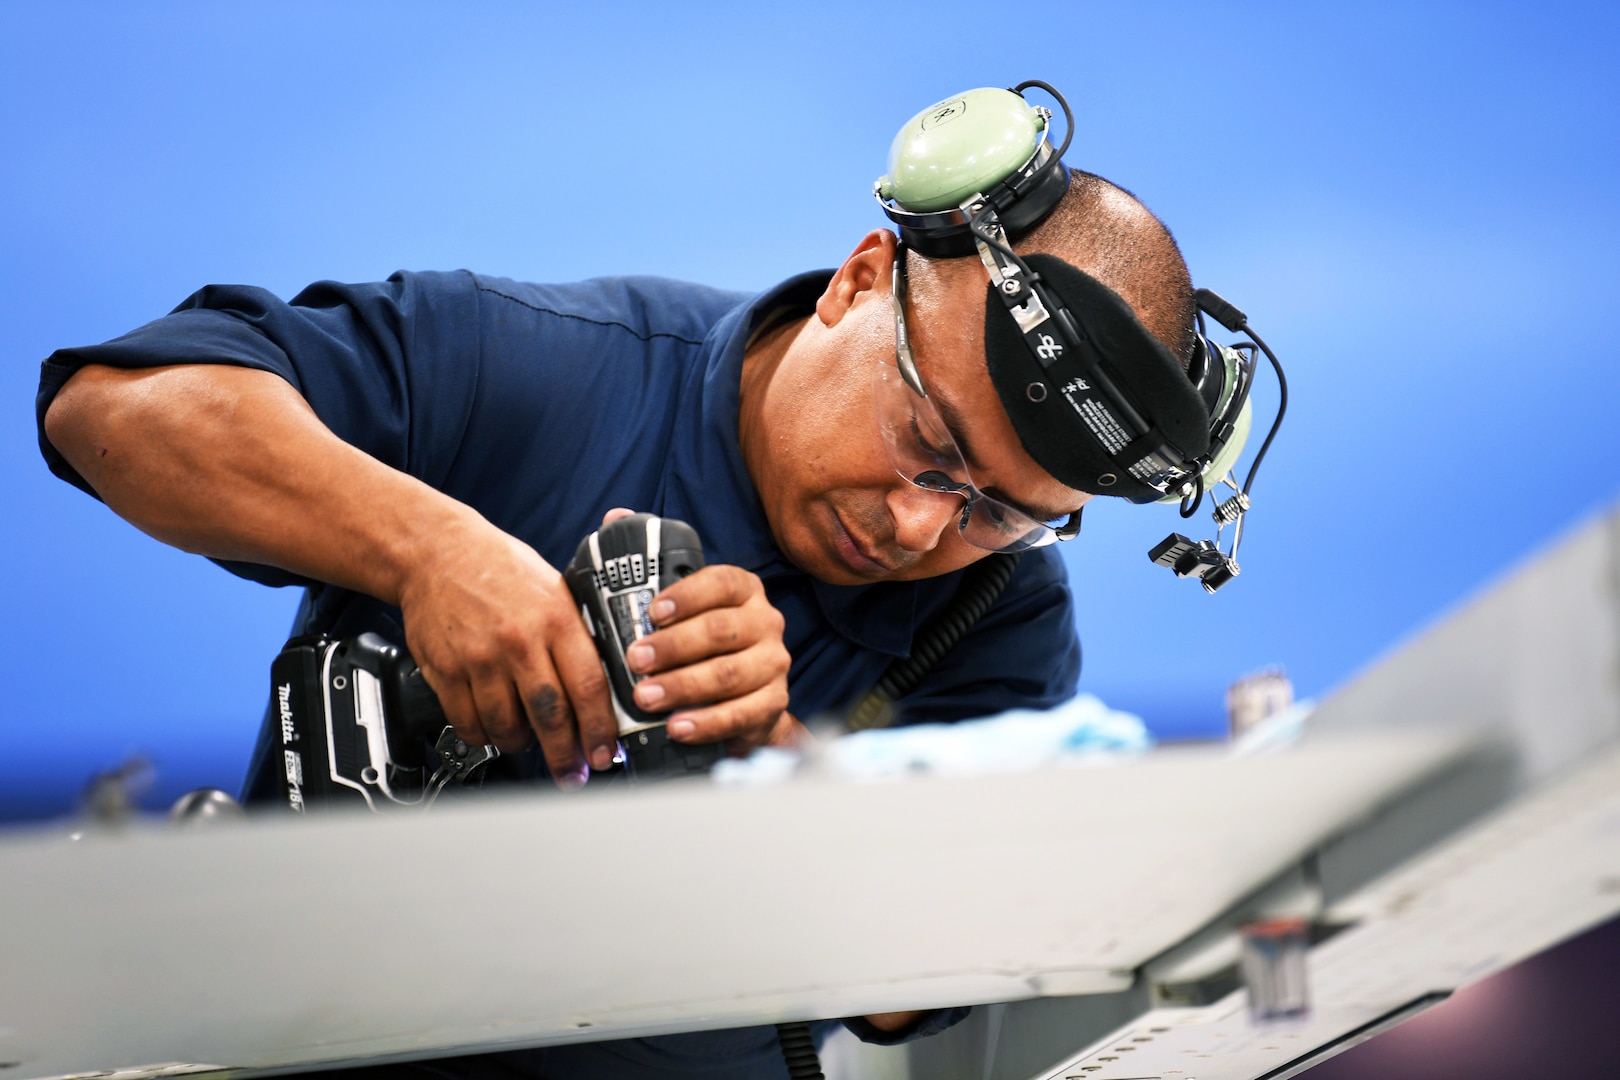 U.S. Air Force Tech. Sgt. Robert Guerrero, an F-16 fleet maintenance manager assigned to the 149th Maintenance Group, Texas Air National Guard, performs repairs and operations checks on an F-16 Fighting Falcon Nov. 21, 2019 at Joint Base San Antonio-Lackland, Texas. (Air National Guard photo by Mindy Bloem)